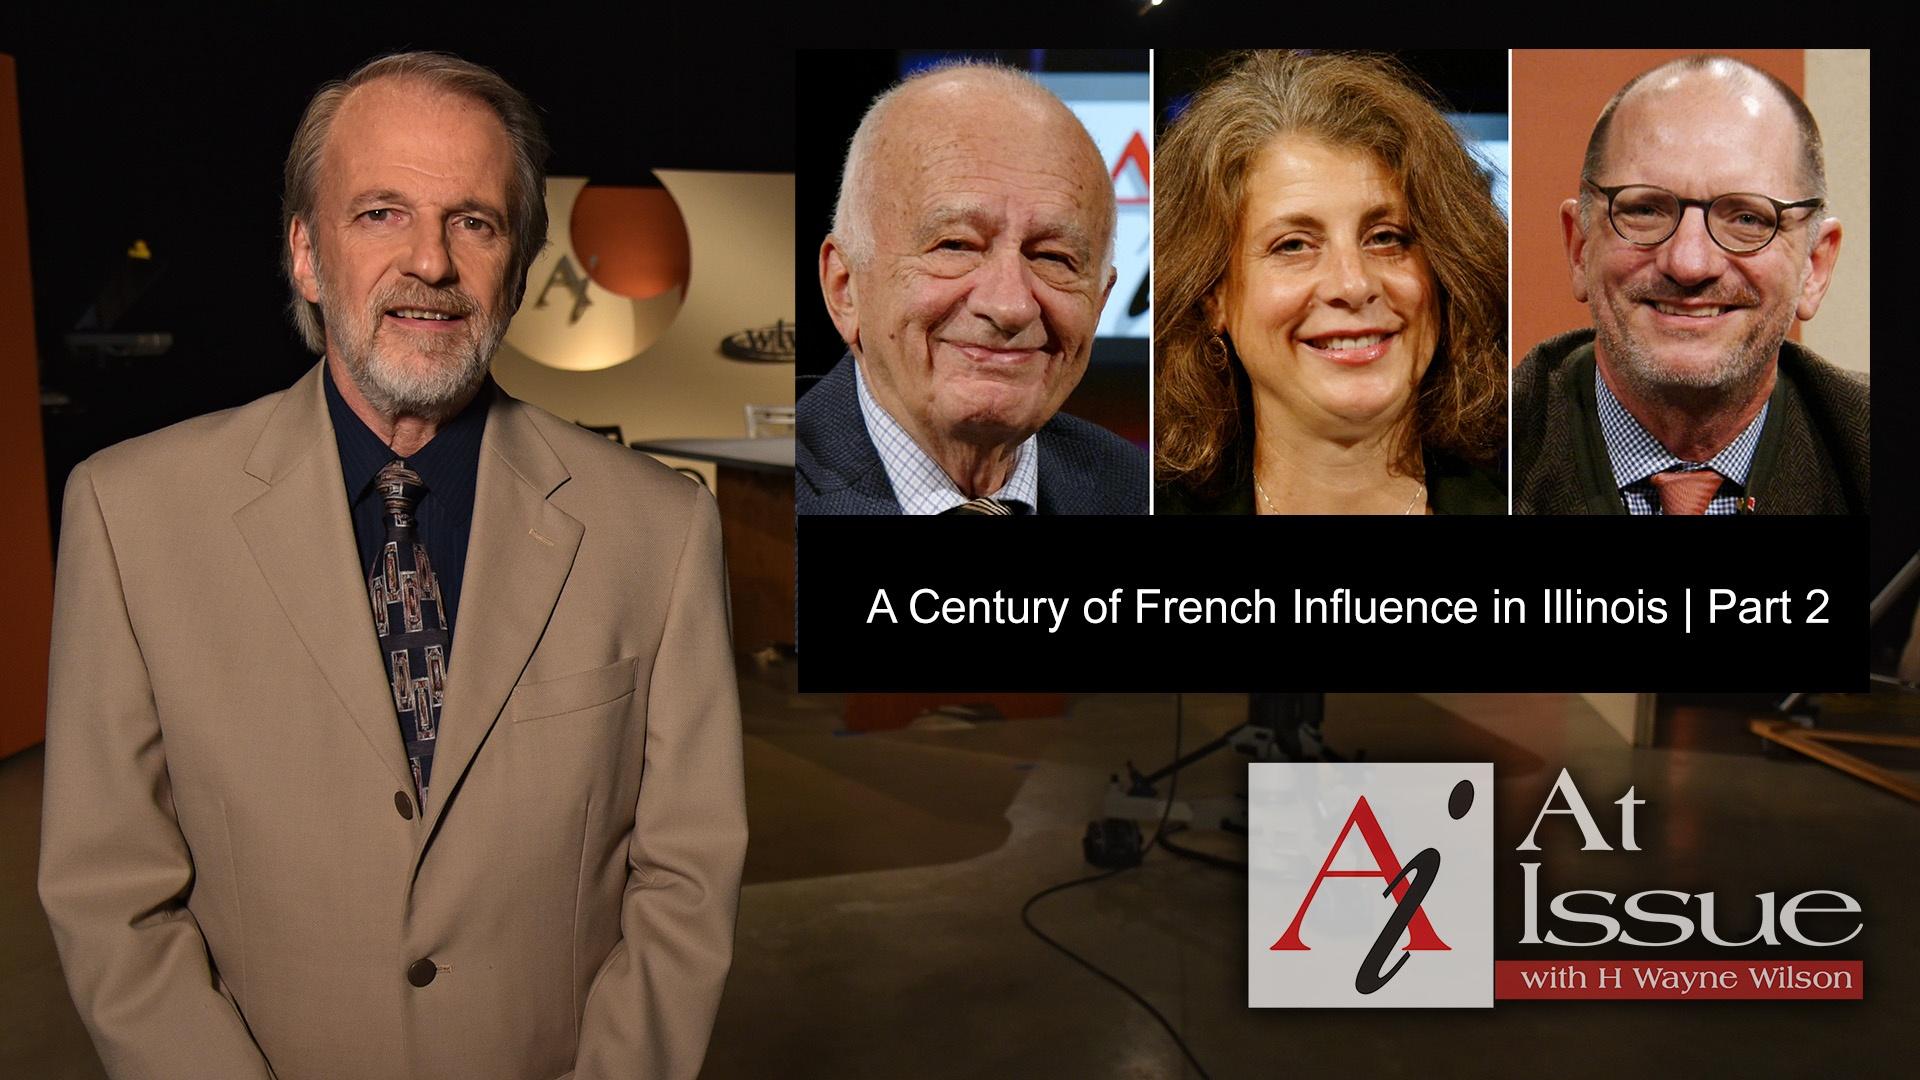 A　35　S35　Season　in　Part　Issue　Century　of　Illinois　Influence　French　Episode　At　PBS　E17:　17